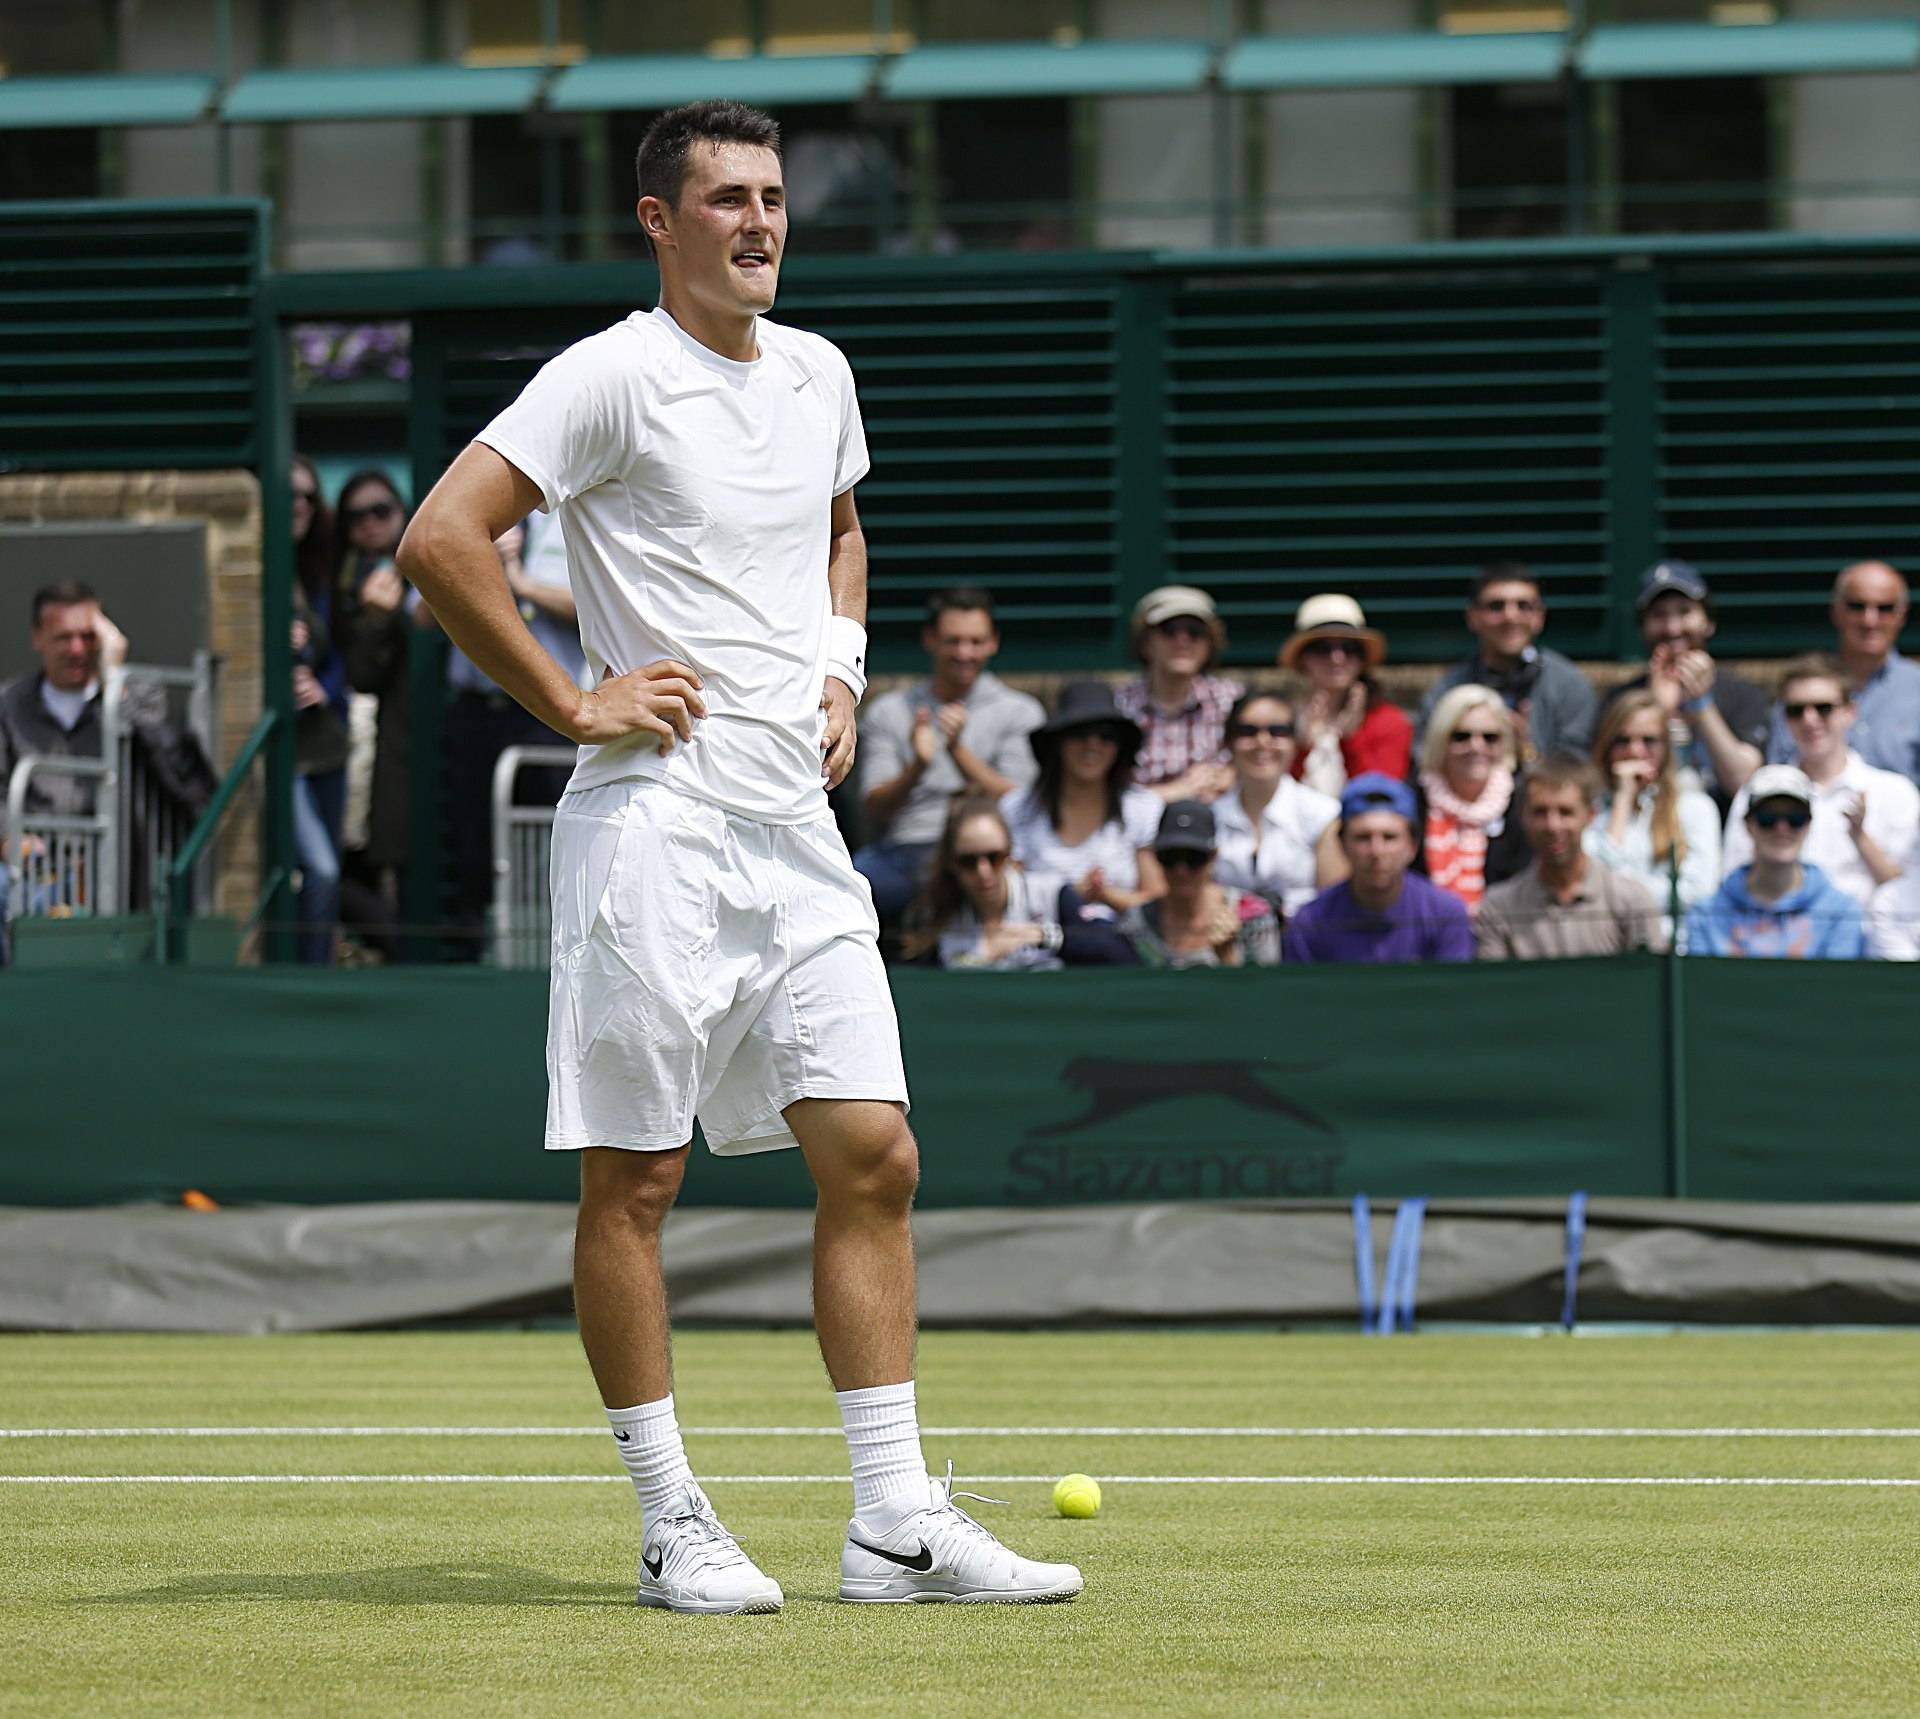 Tennis - 2013 Wimbledon Championships - Day Four - The All England Lawn Tennis and Croquet Club